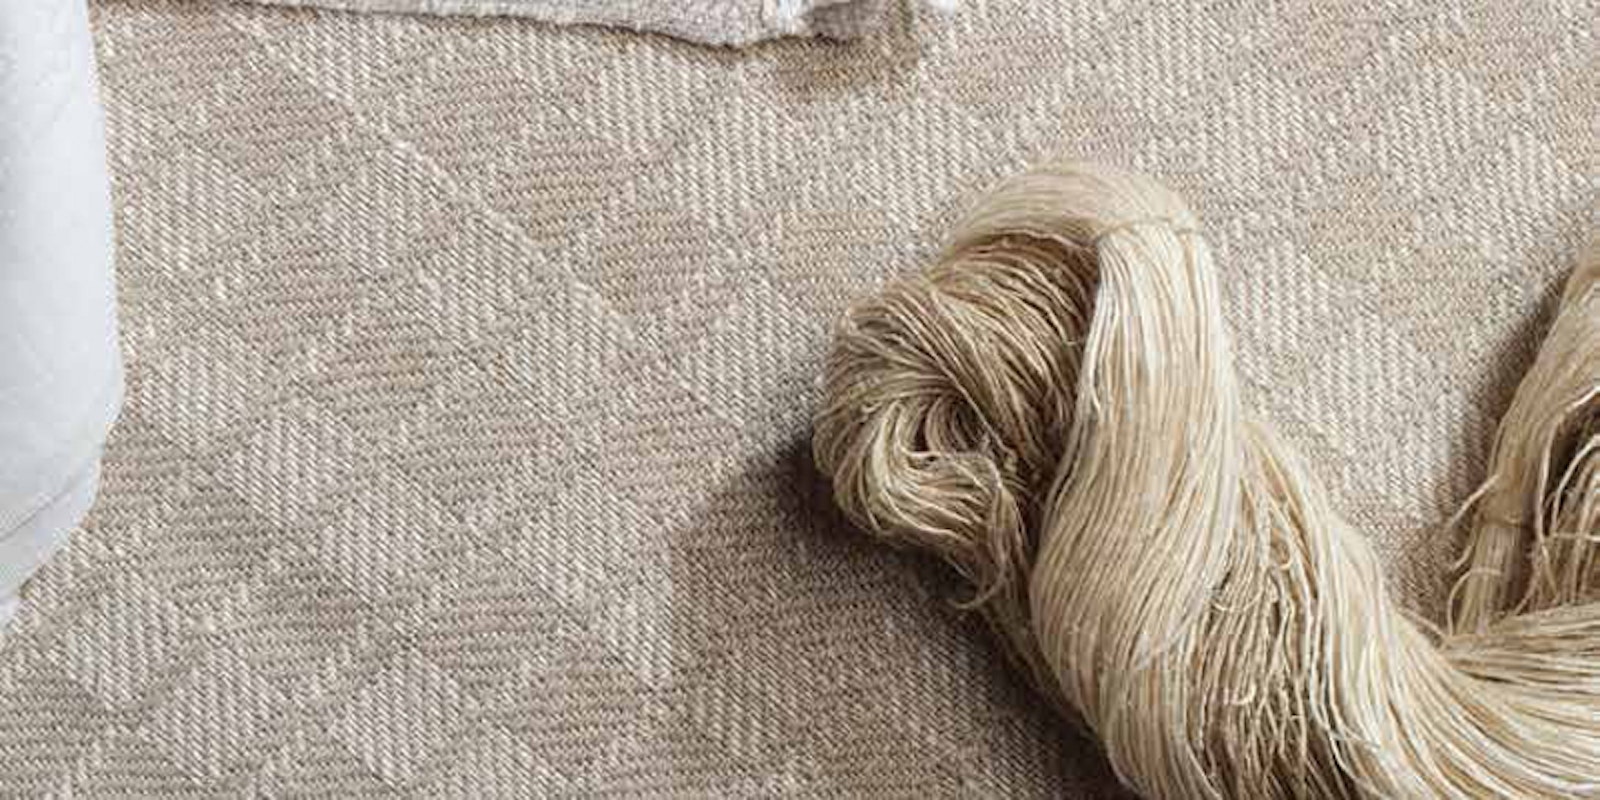 Amazing Guide to Spinning Flax: Linen Spun from Flax Fibers